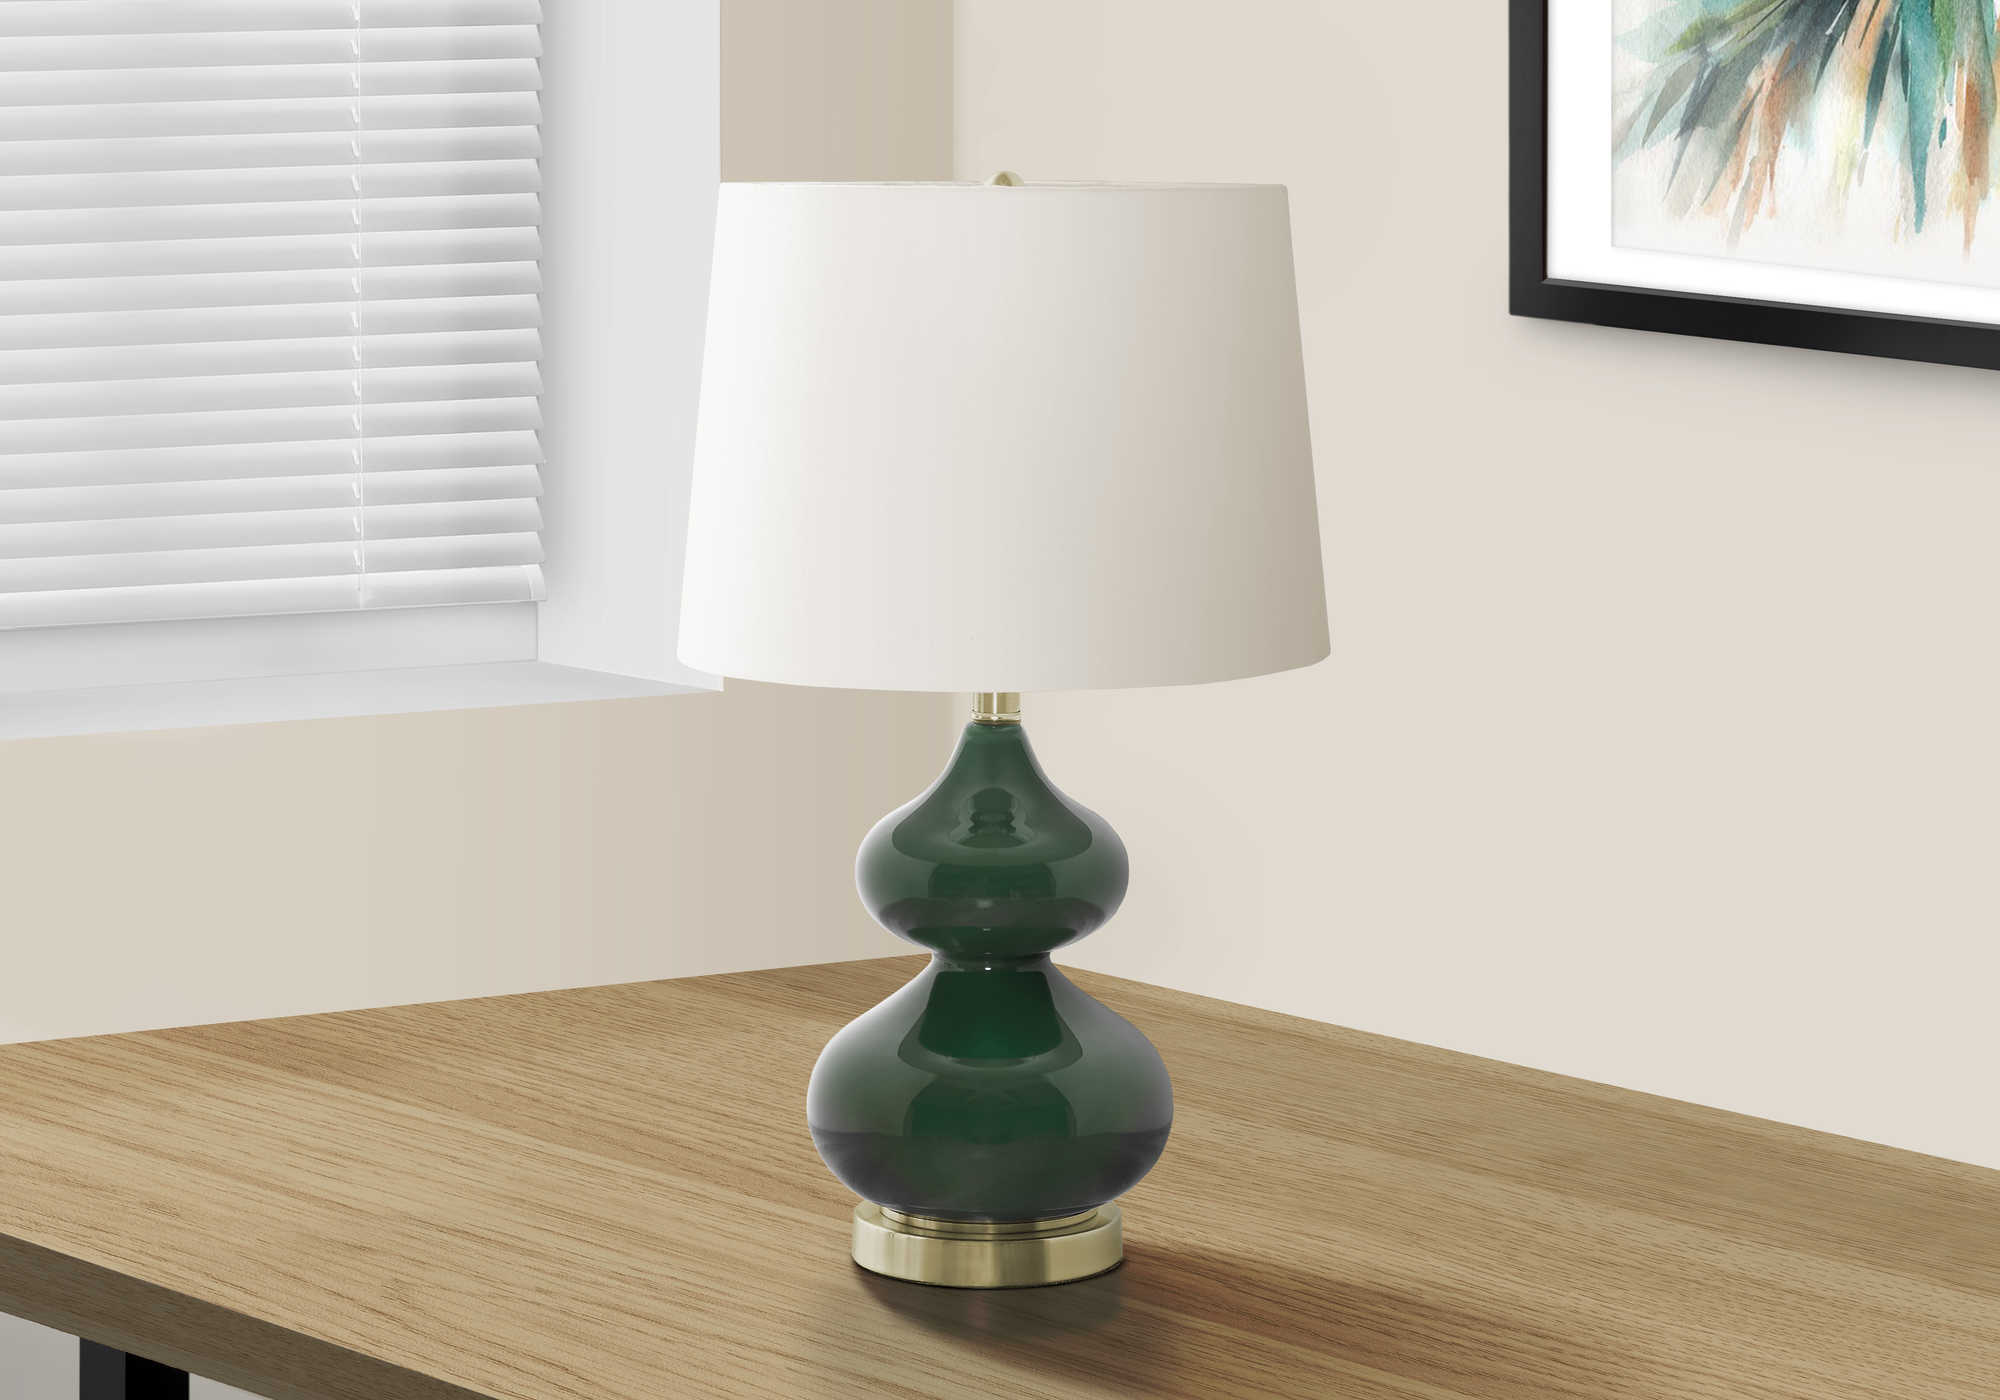 LIGHTING - 24"H TABLE LAMP GREEN GLASS / IVORY SHADE